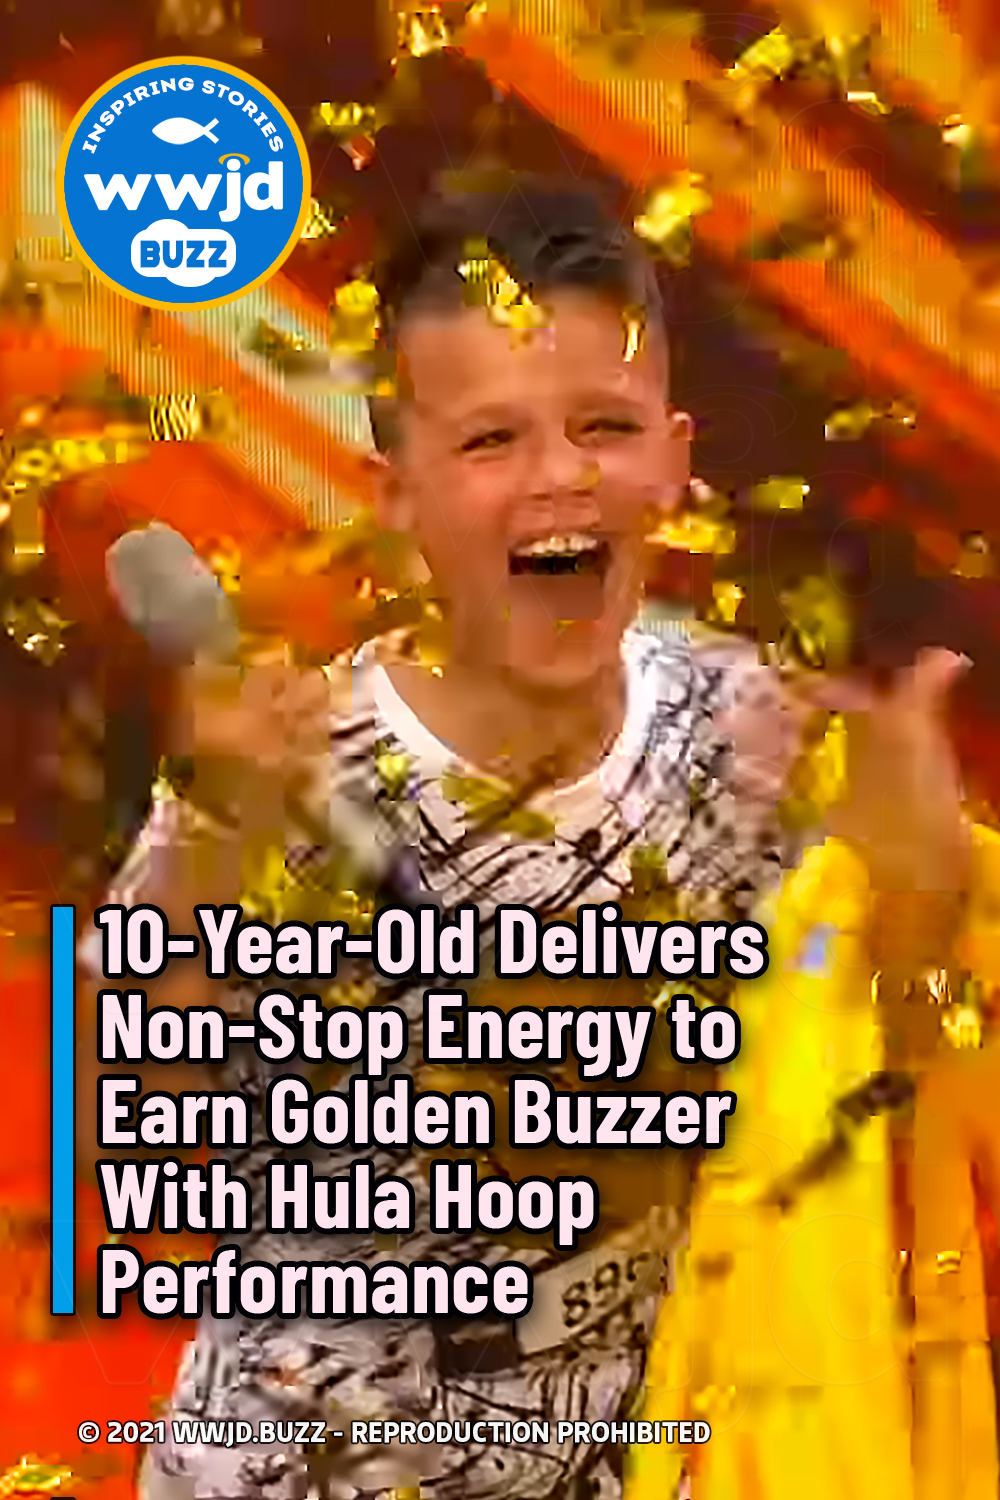 10-Year-Old Delivers Non-Stop Energy to Earn Golden Buzzer With Hula Hoop Performance